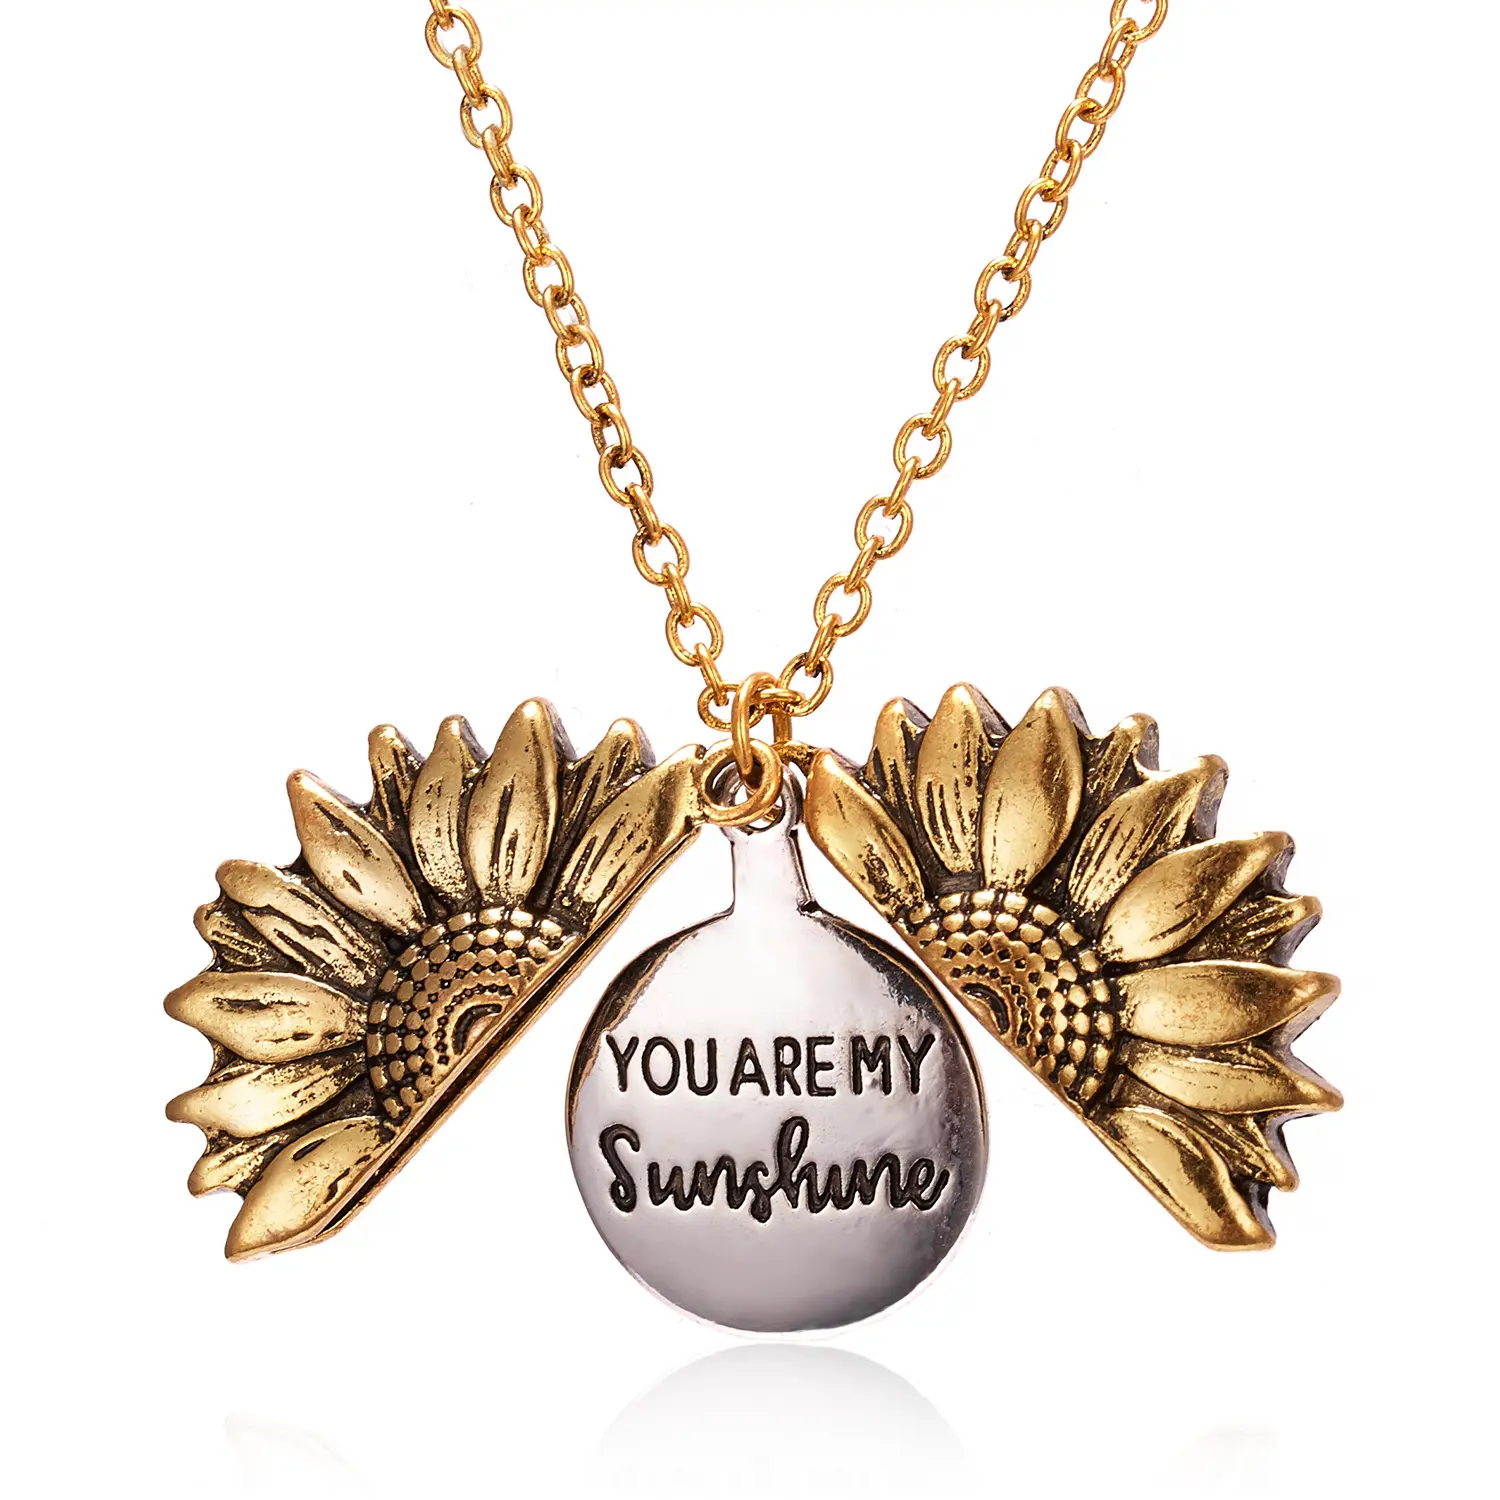 Valentine's Day Gift You Are My Sunshine Engraved Sunflower Pendant Necklaces for Couple